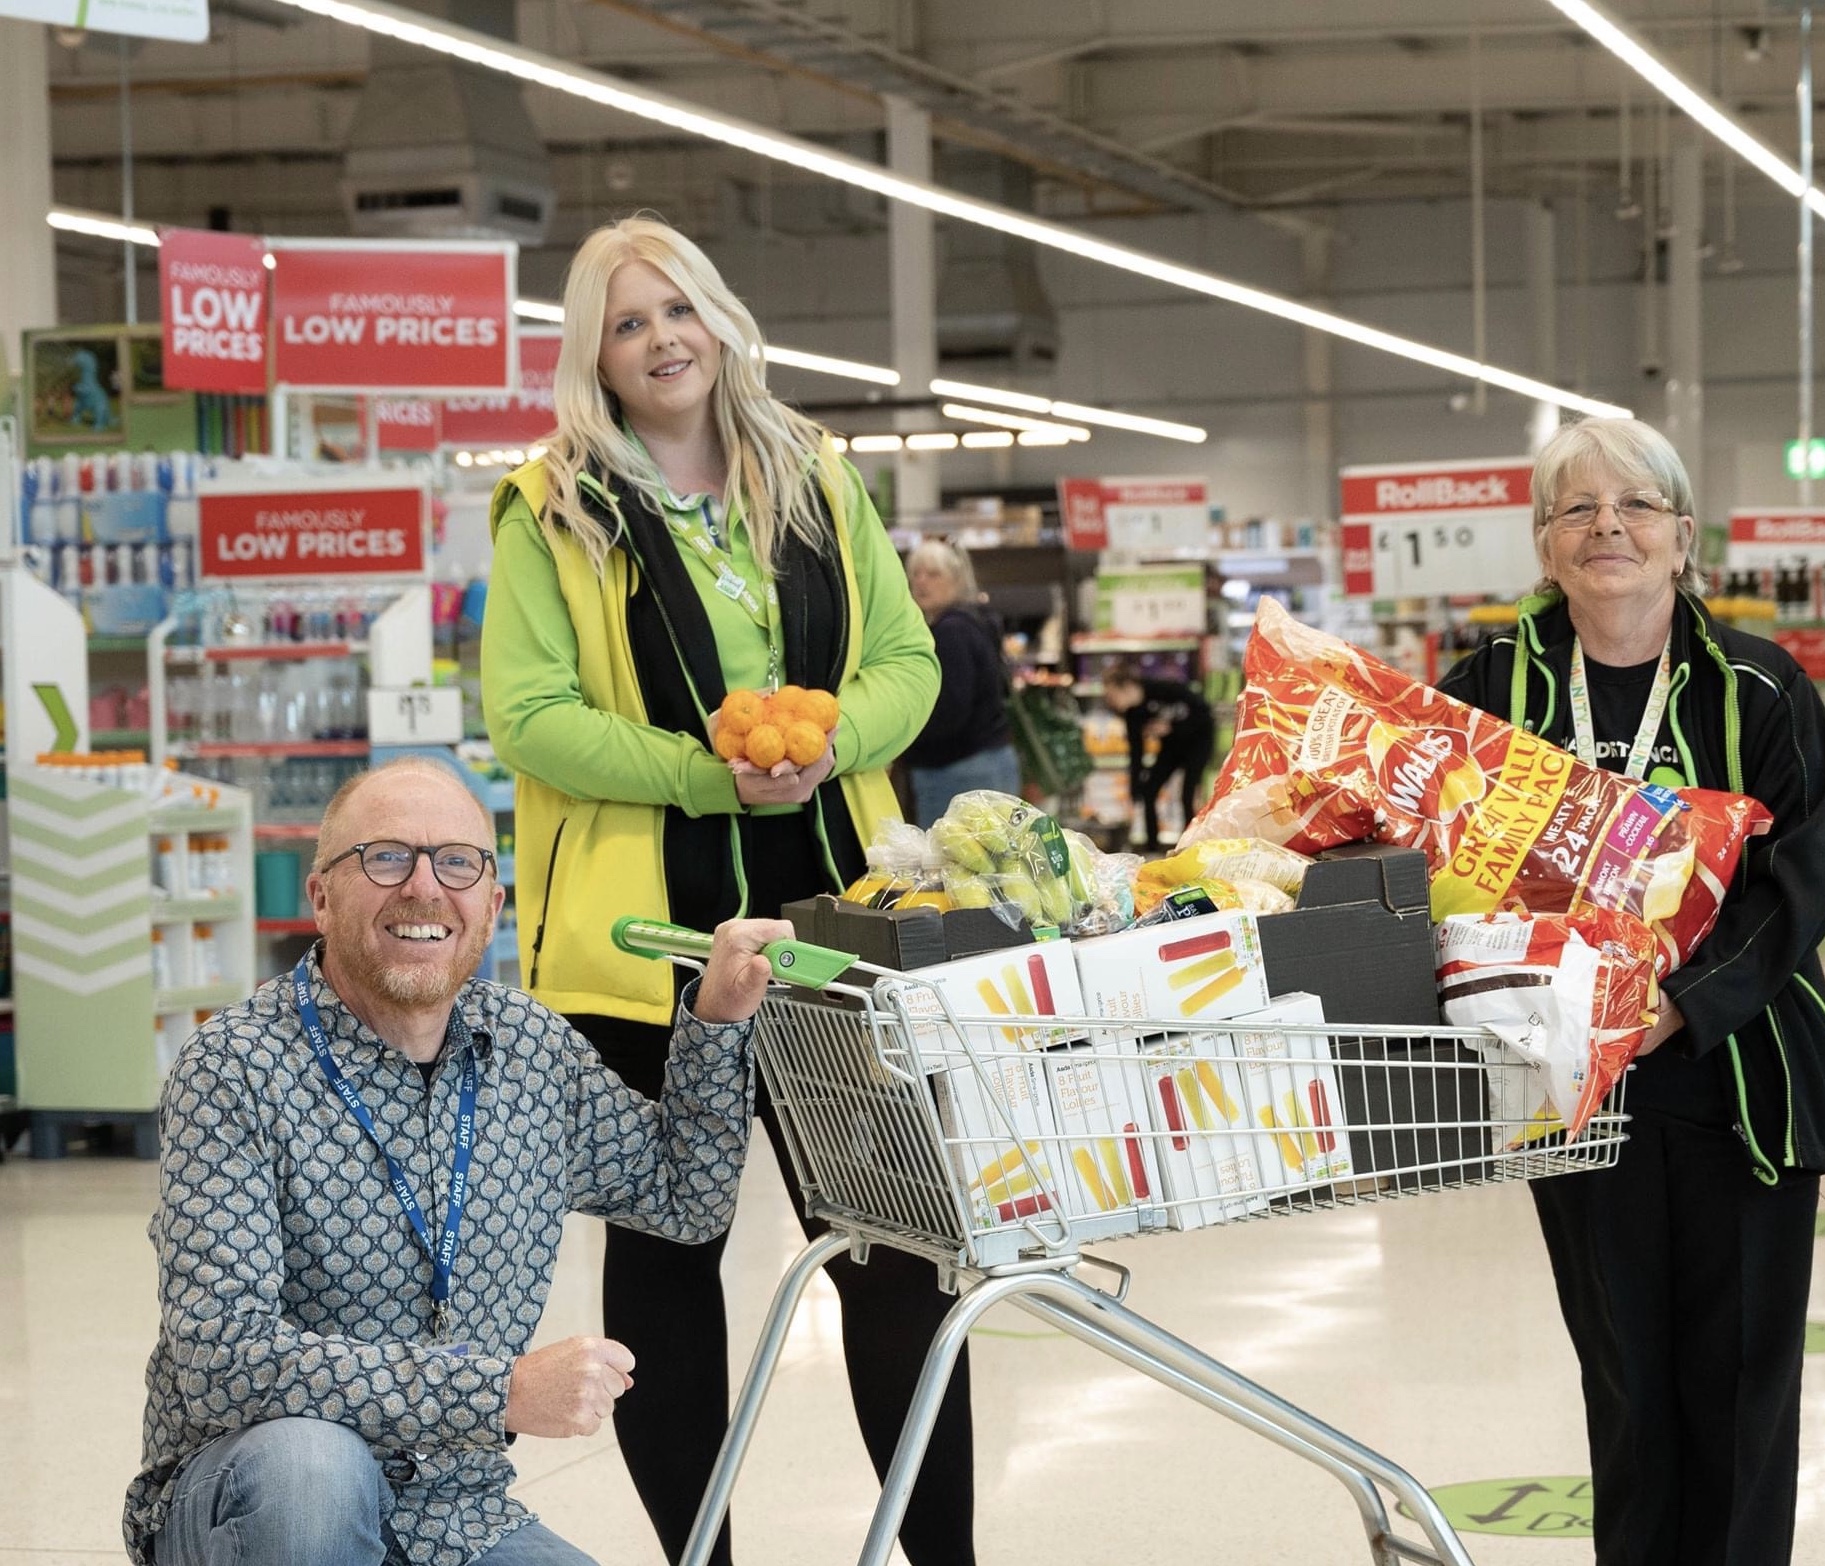 COMMUNITY | Asda donates toiletries and groceries to St Michael’s Hospice